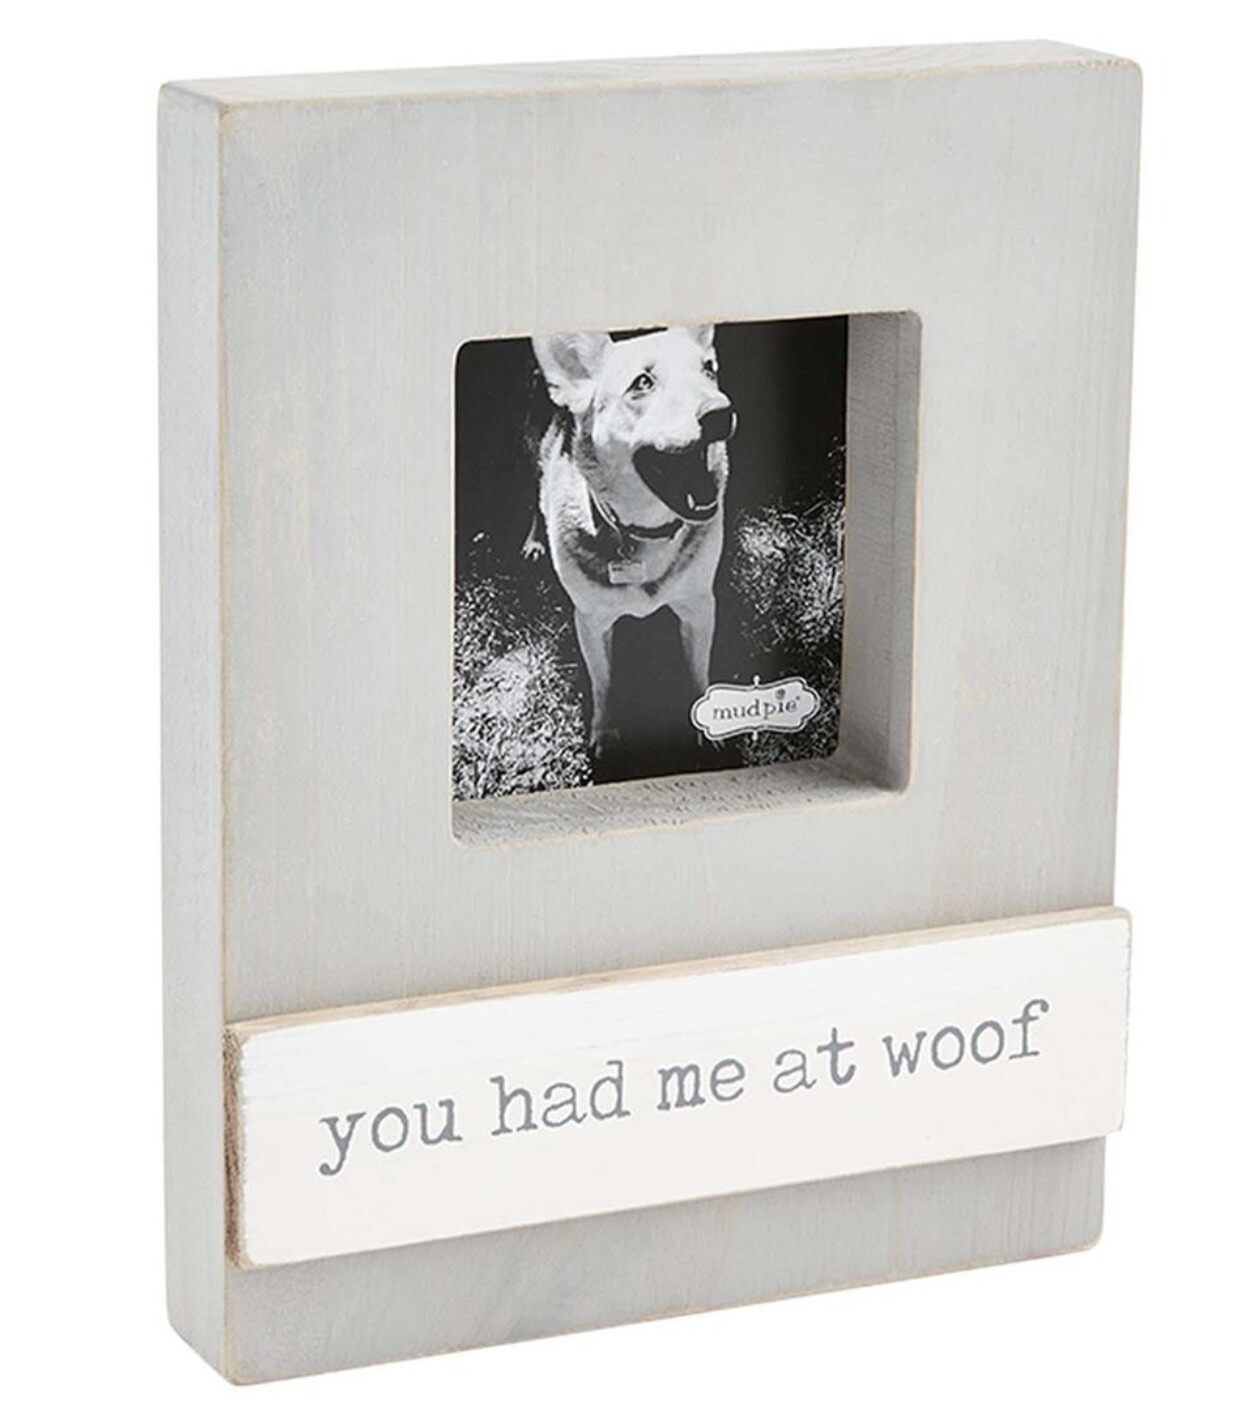 E-You had me at woof frame